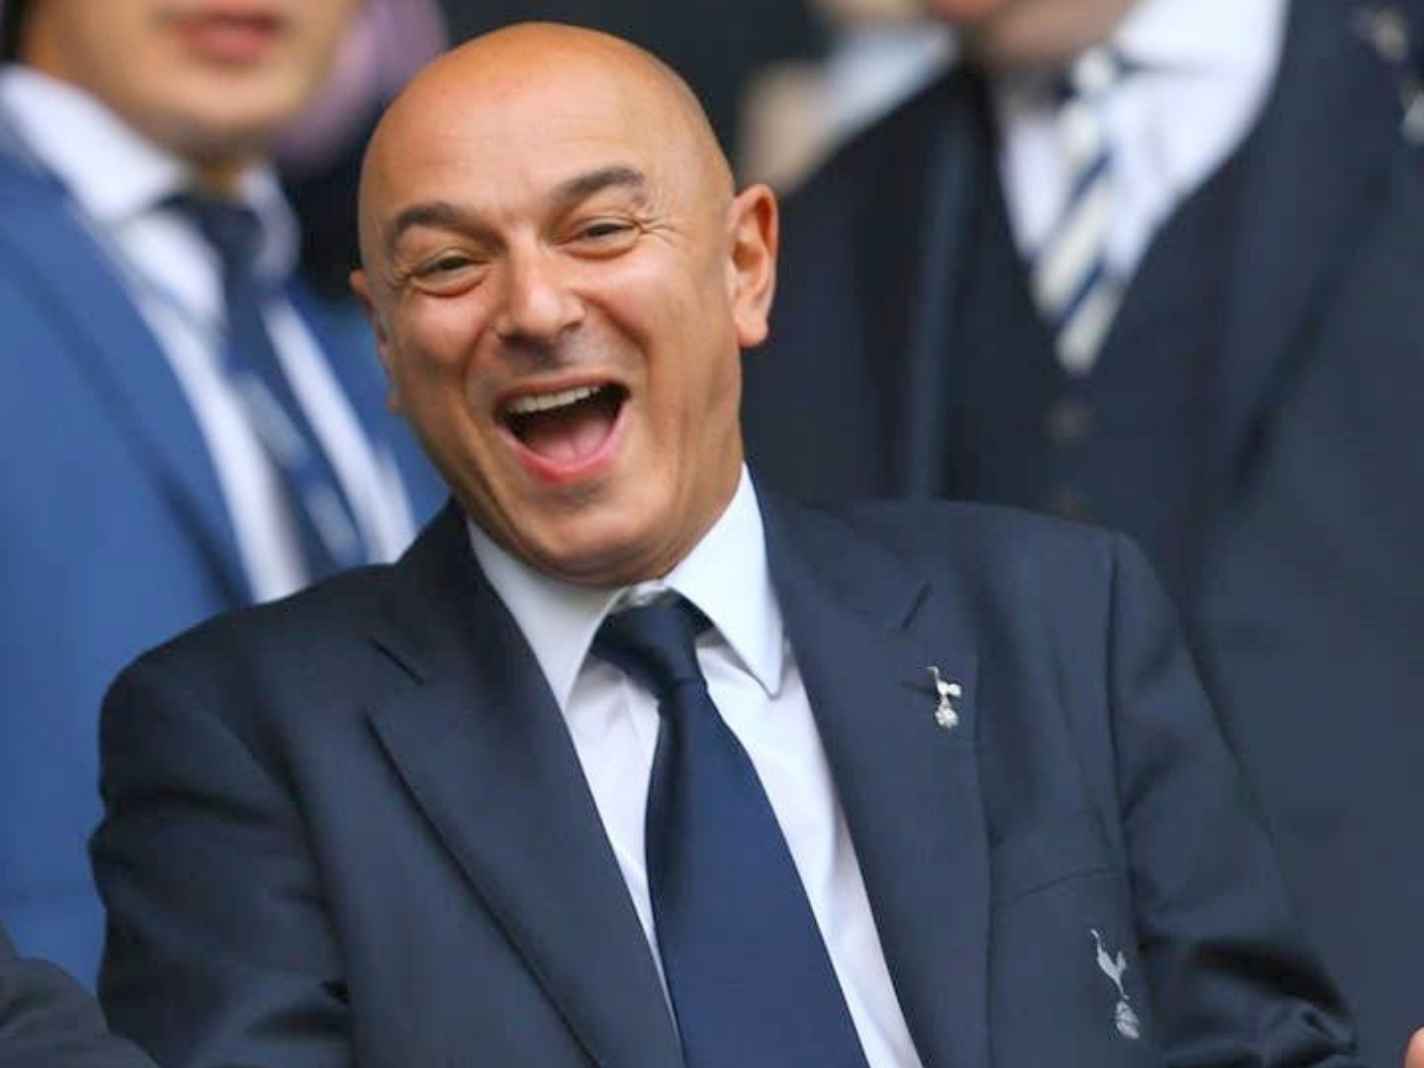 Rare photo of Tottenham chairman Daniel Levy with hair has fans shocked ...